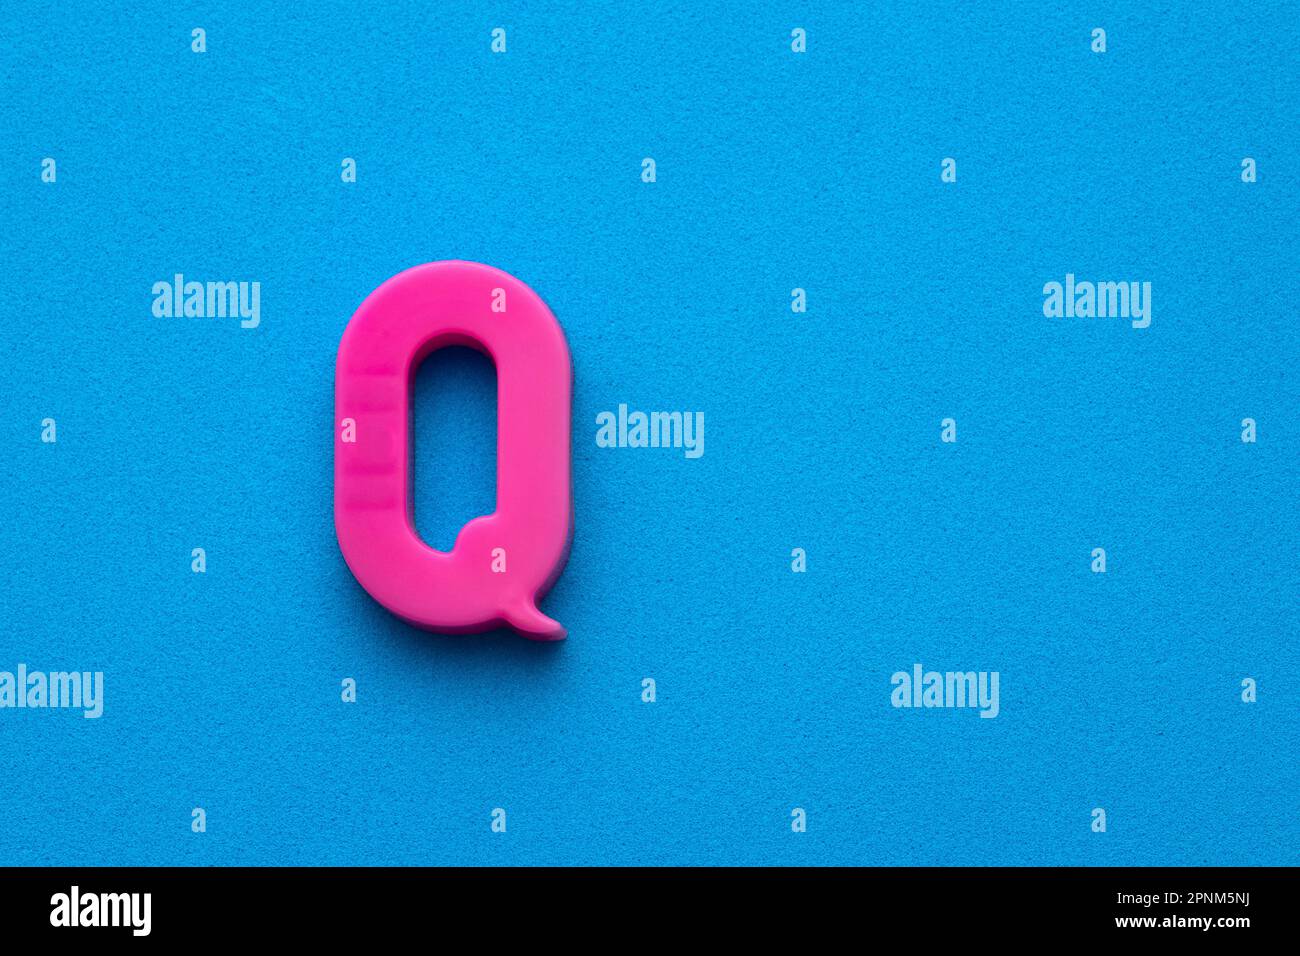 Plastic pink letter Q uppercase on blue foamy background Stock Photo